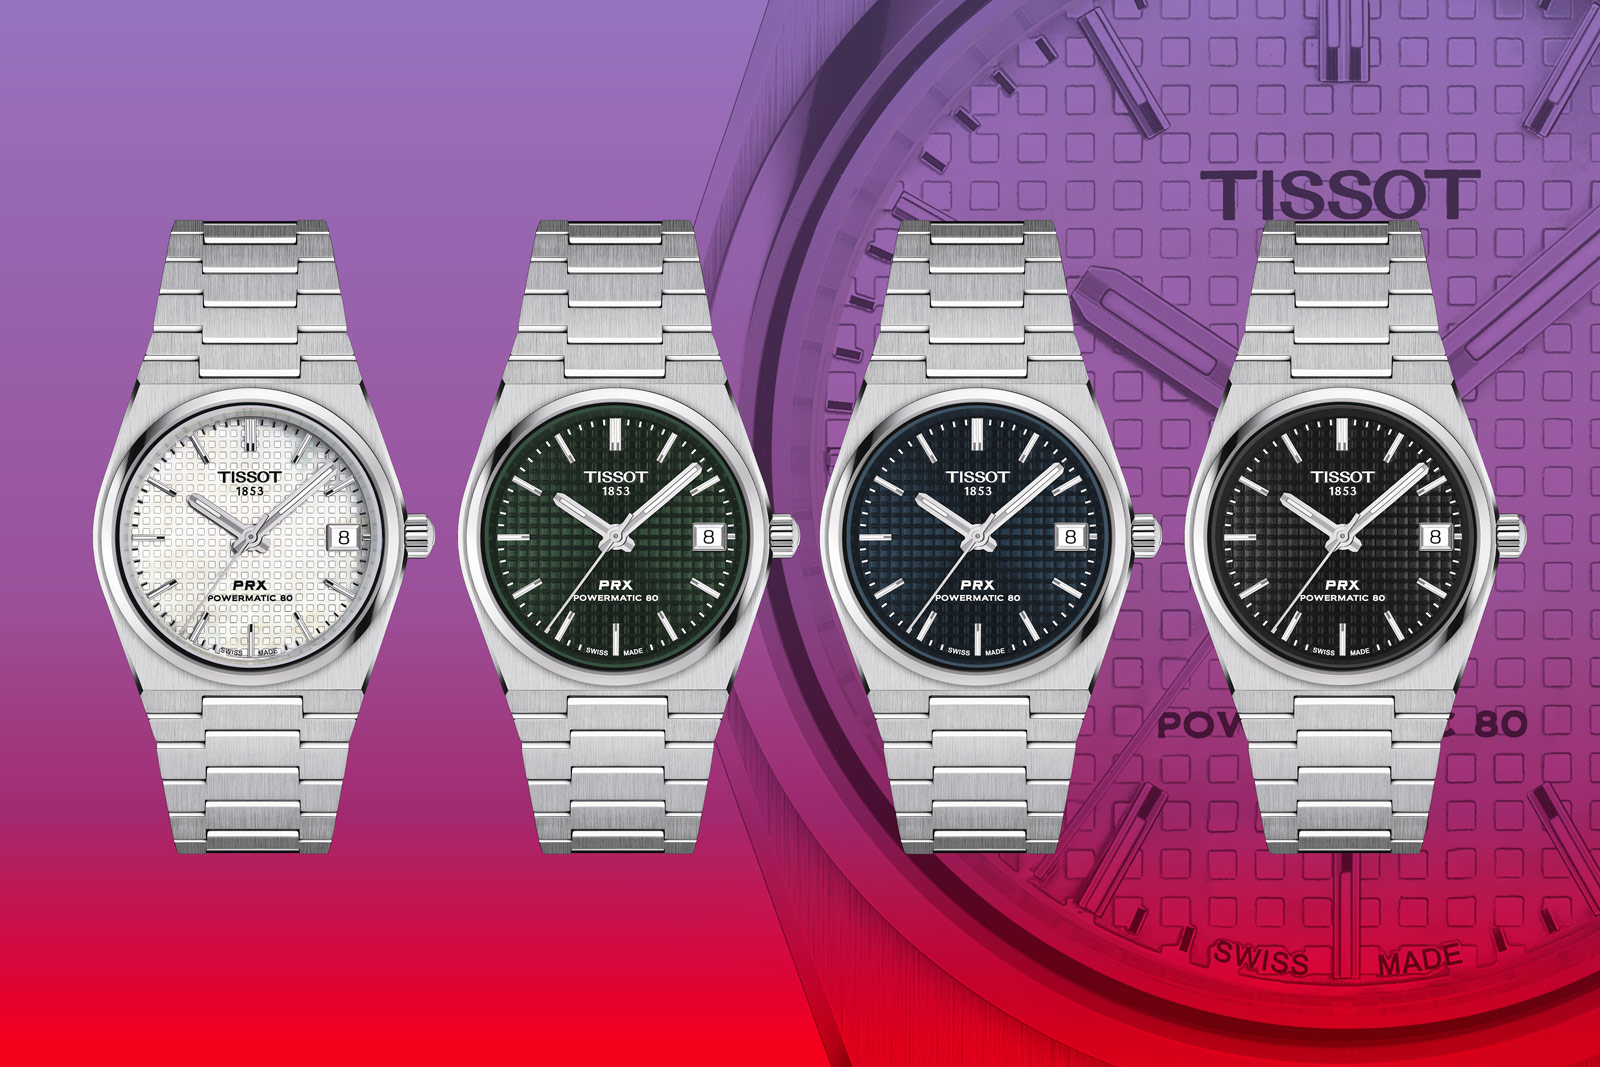 Tissot Introduces the PRX Powermatic 80 35 mm | SJX Watches